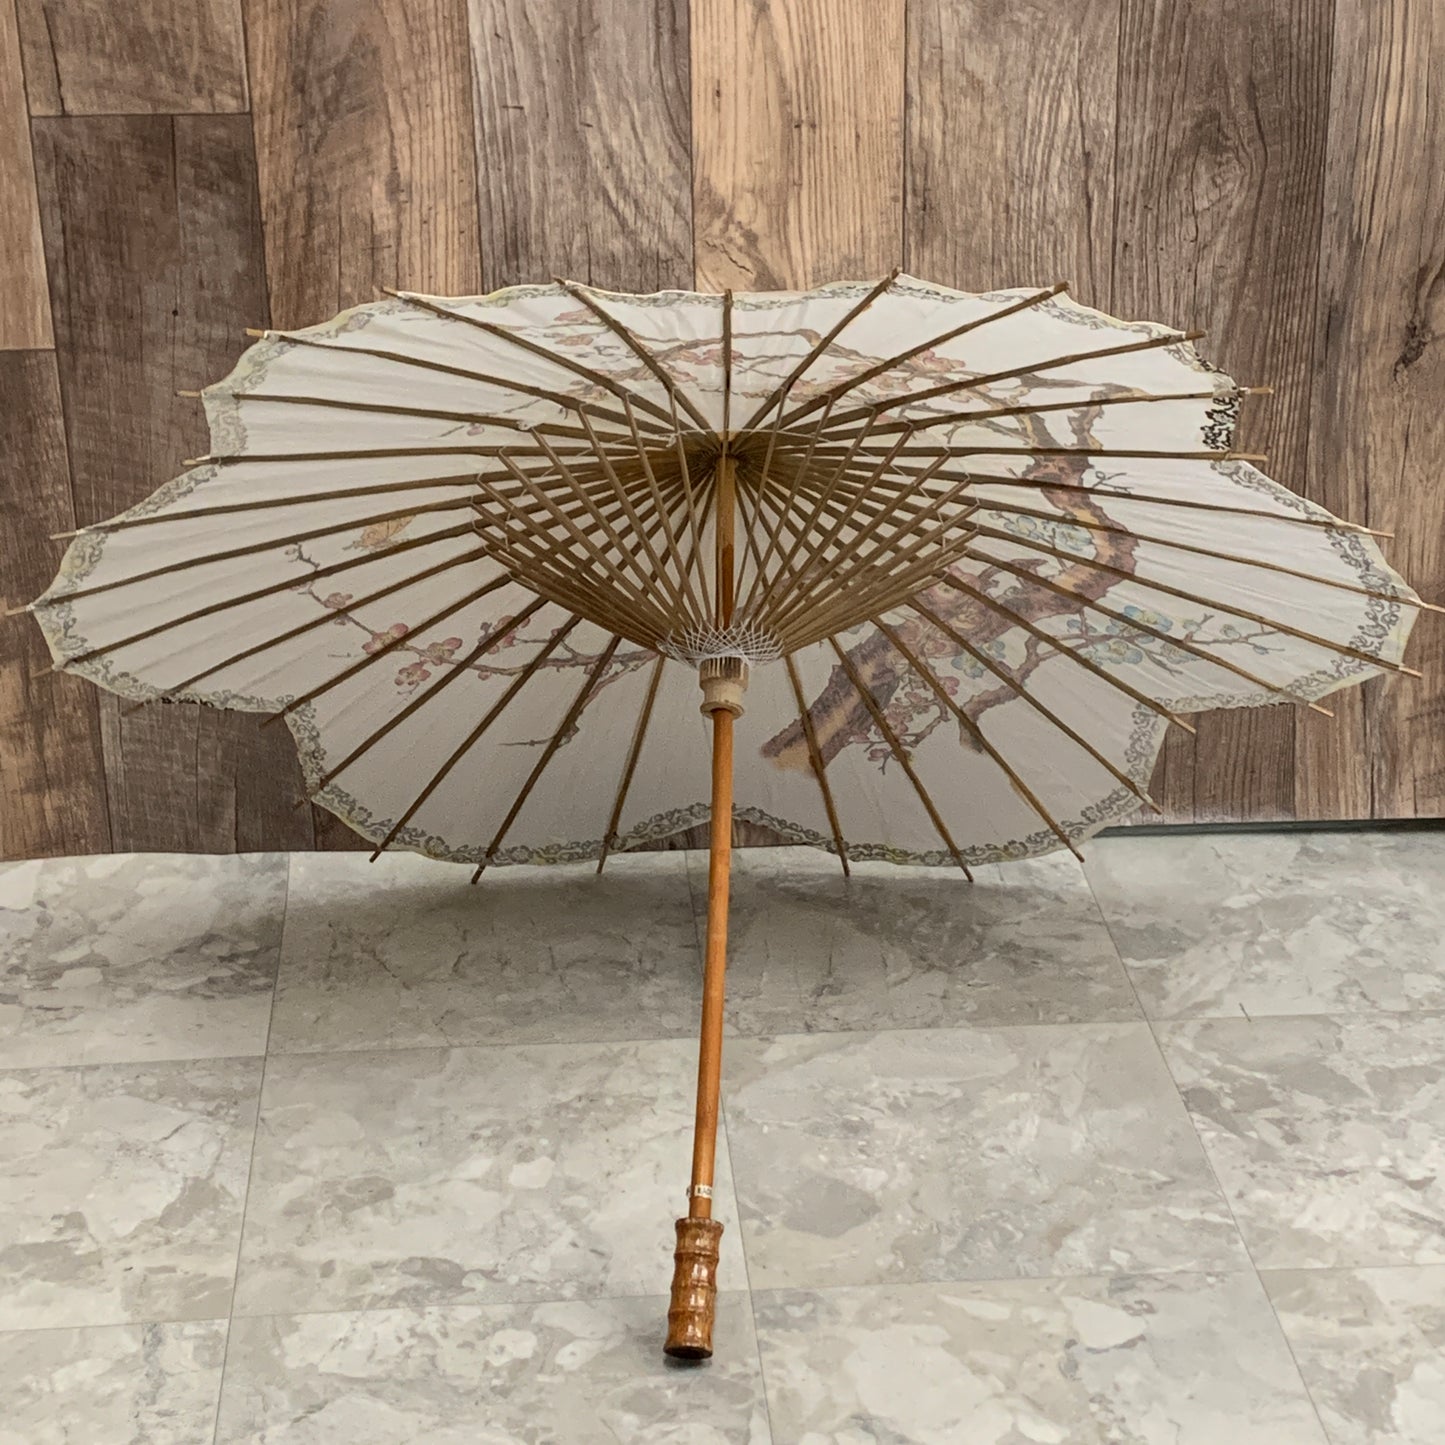 Vintage Rice Paper Parasol with Cherry Blossom Design and Scalloped Edge